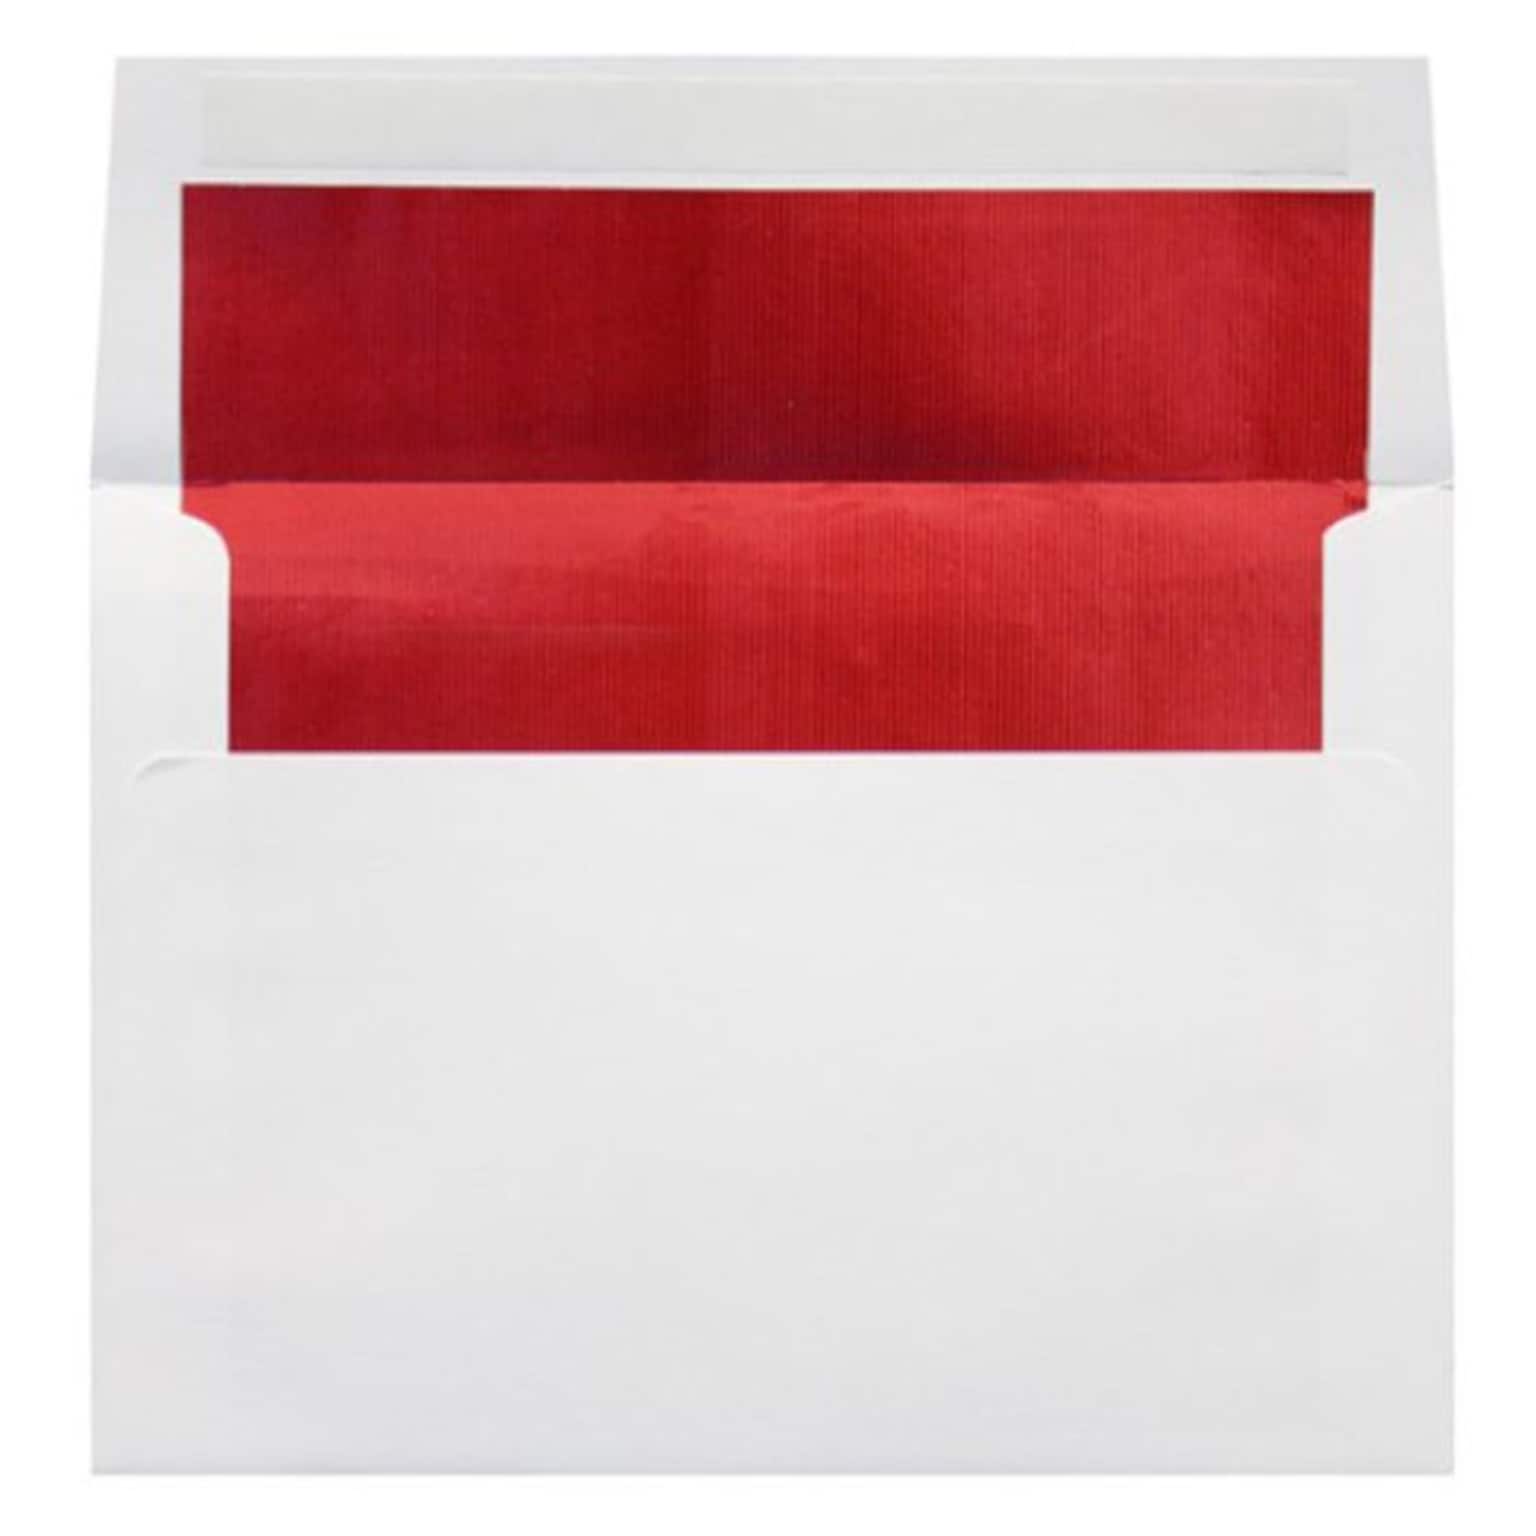 LUX A7 Foil Lined Invitation Envelopes (5 1/4 x 7 1/4) 250/Box, White w/Red LUX Lining (FLWH4880-01-250)